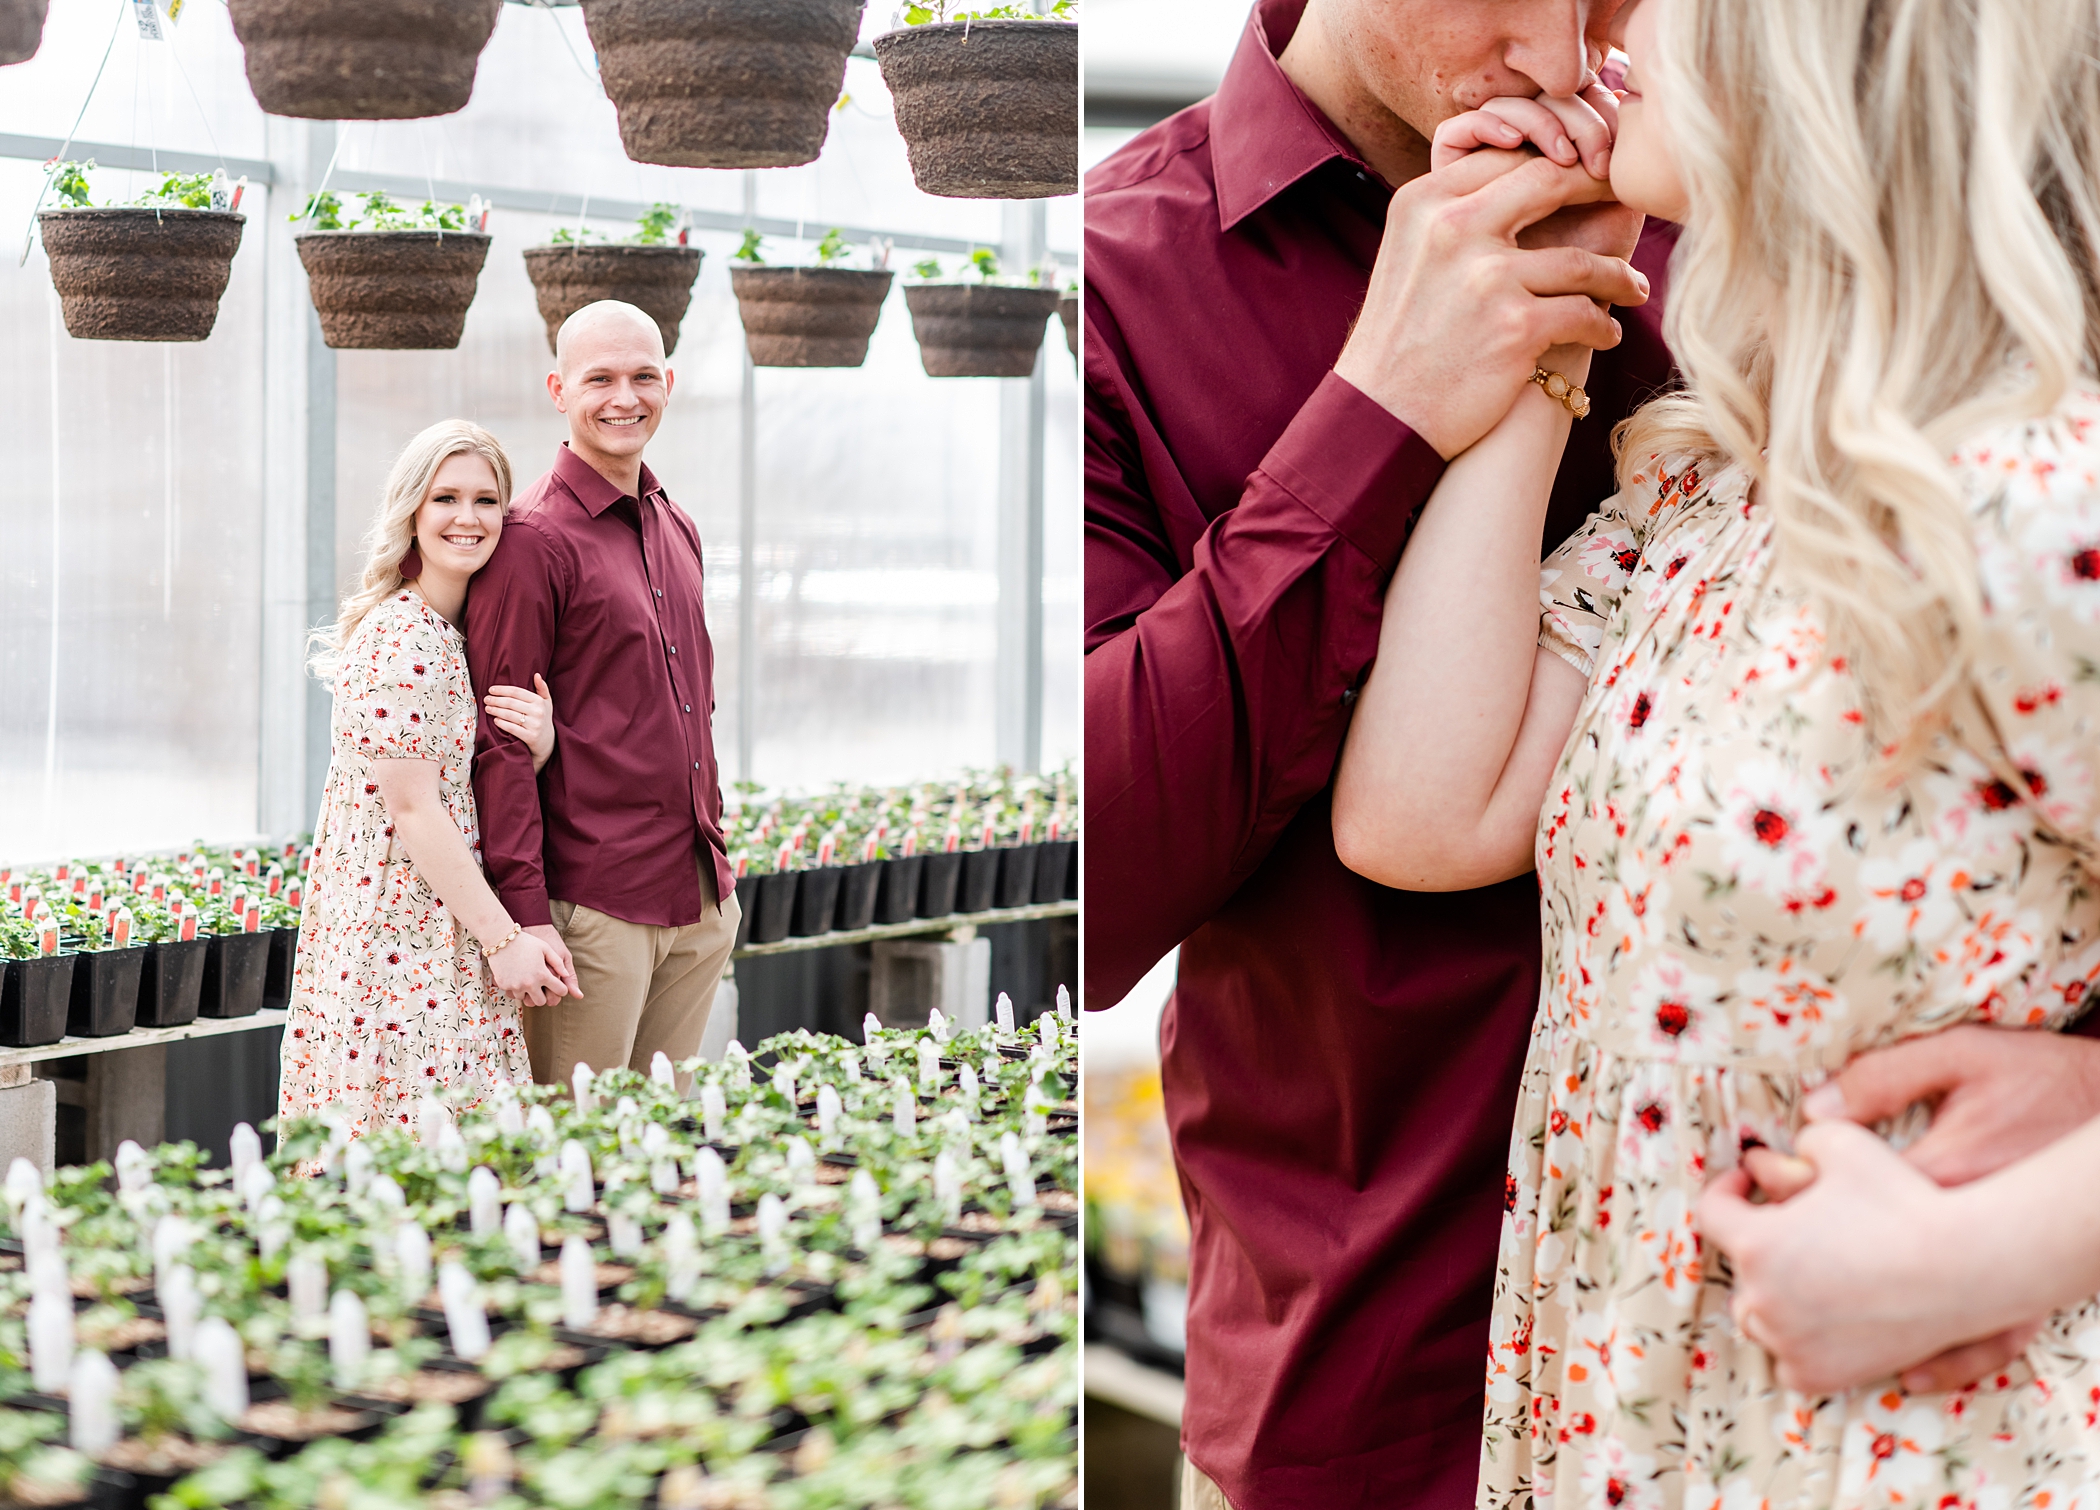 Engagements in a greenhouse